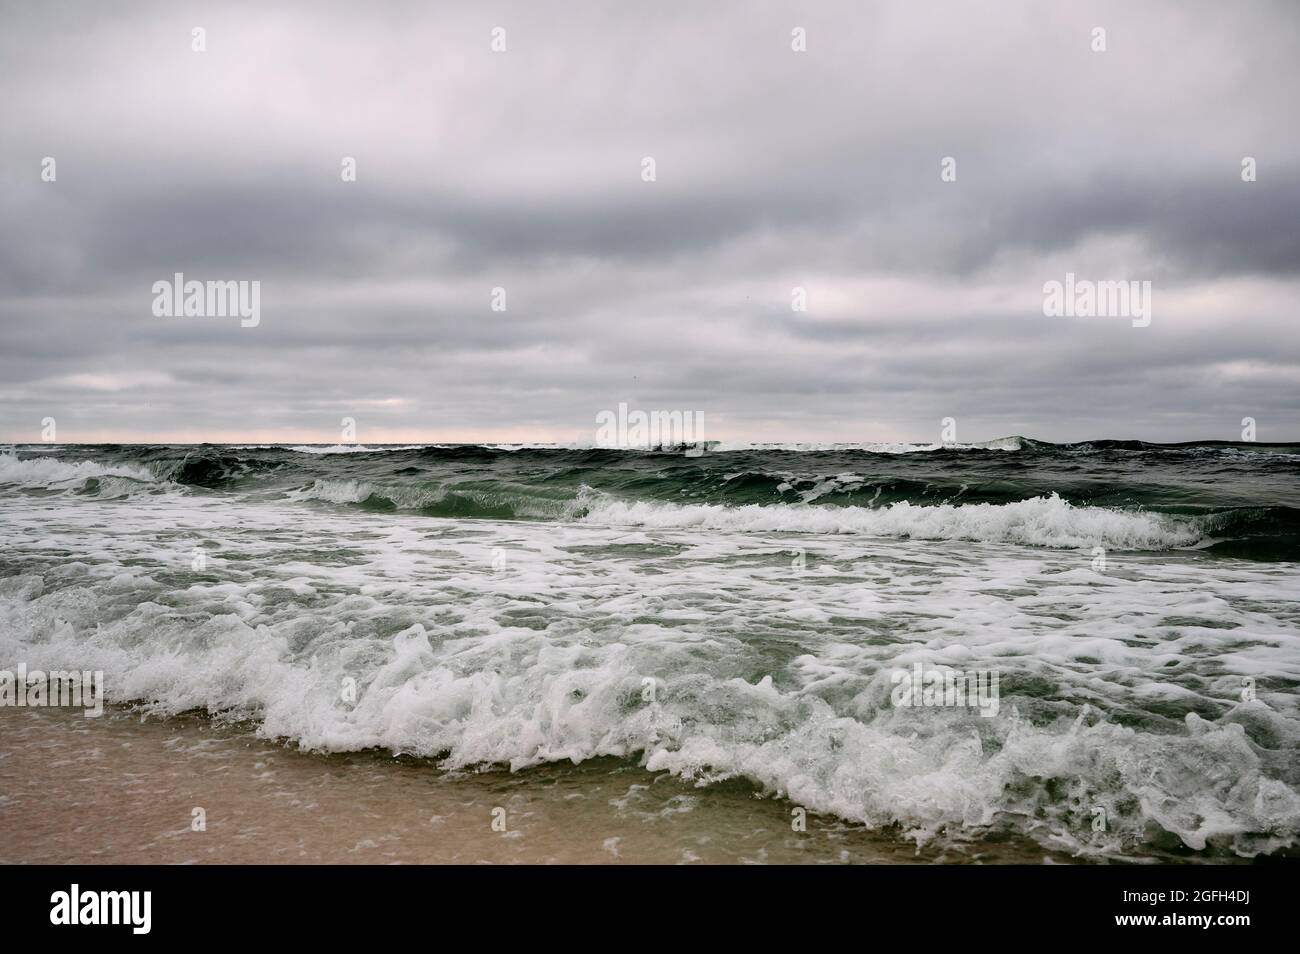 Waves in the Gulf of Mexico roll in or are rolling in on the beach during a storm near Destin Florida, USA. Stock Photo